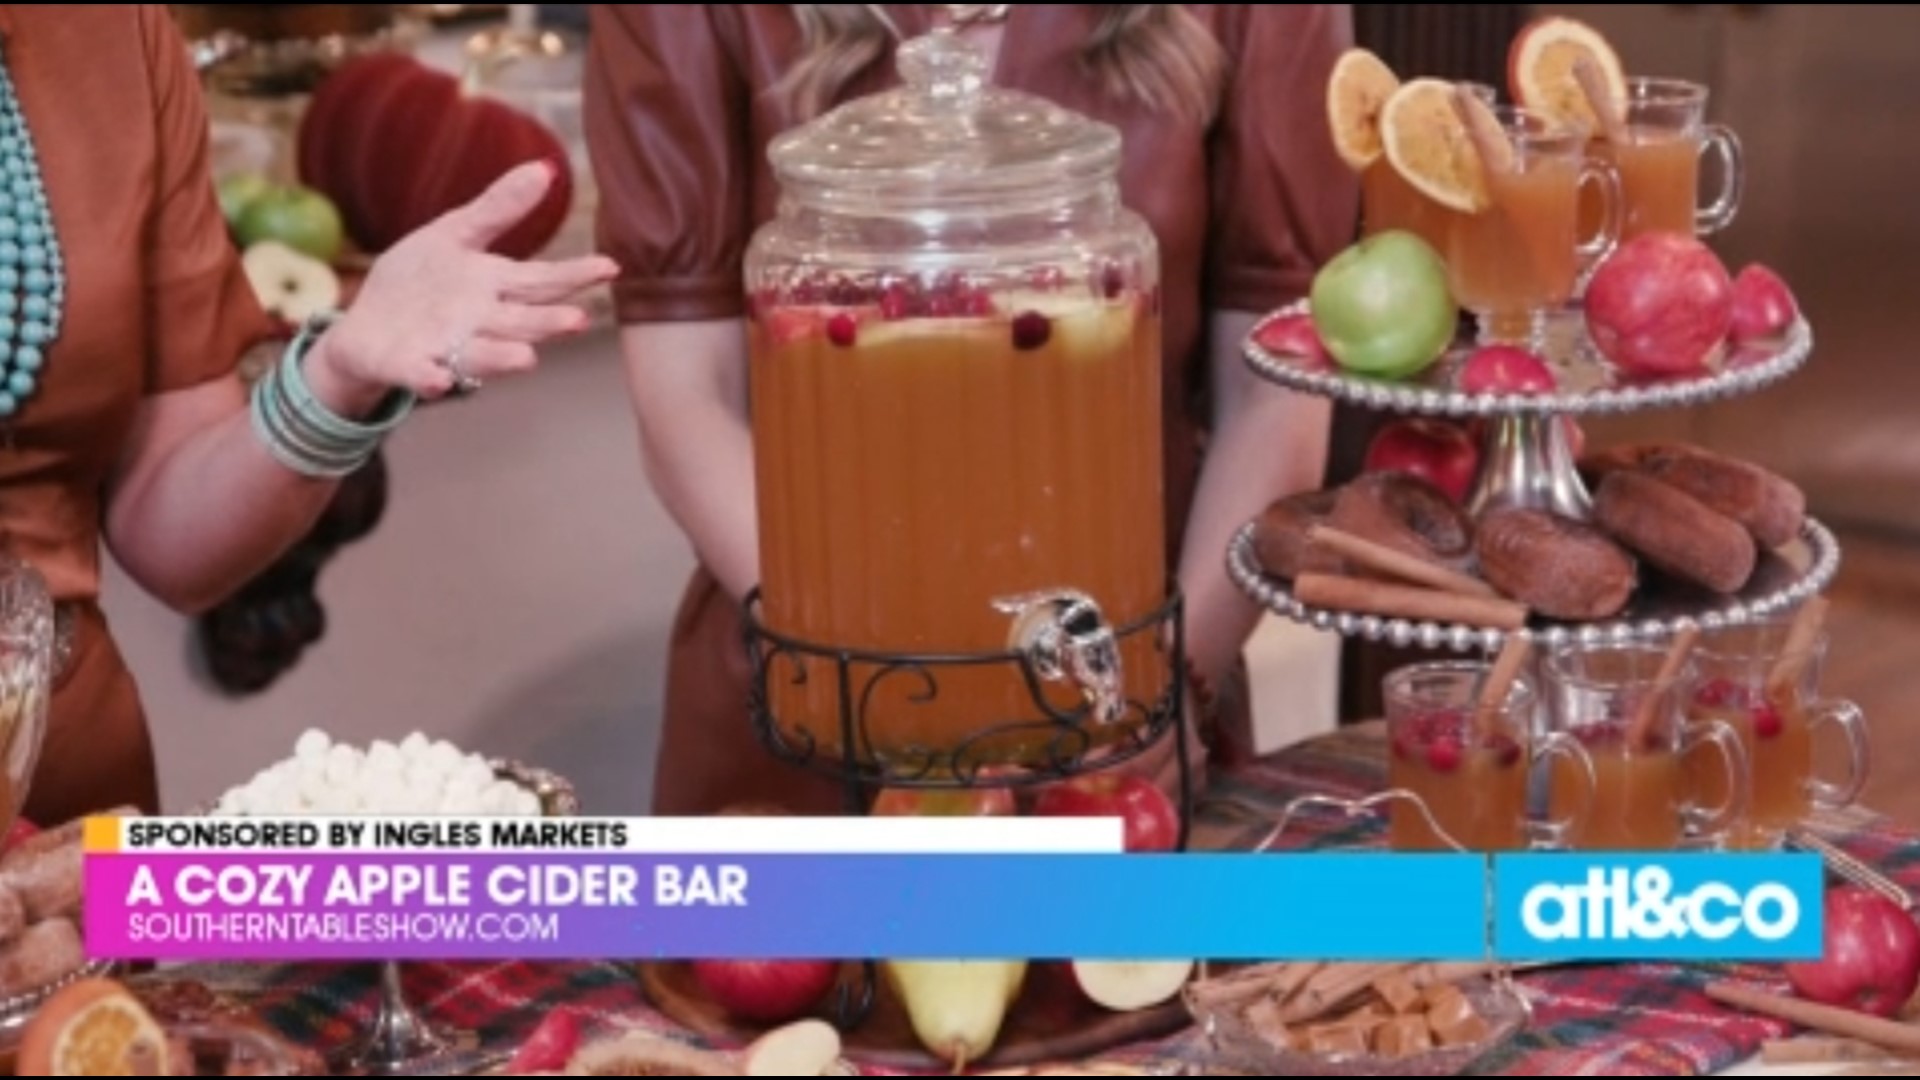 Ring in the fall season with a festive & fun apple cider bar!